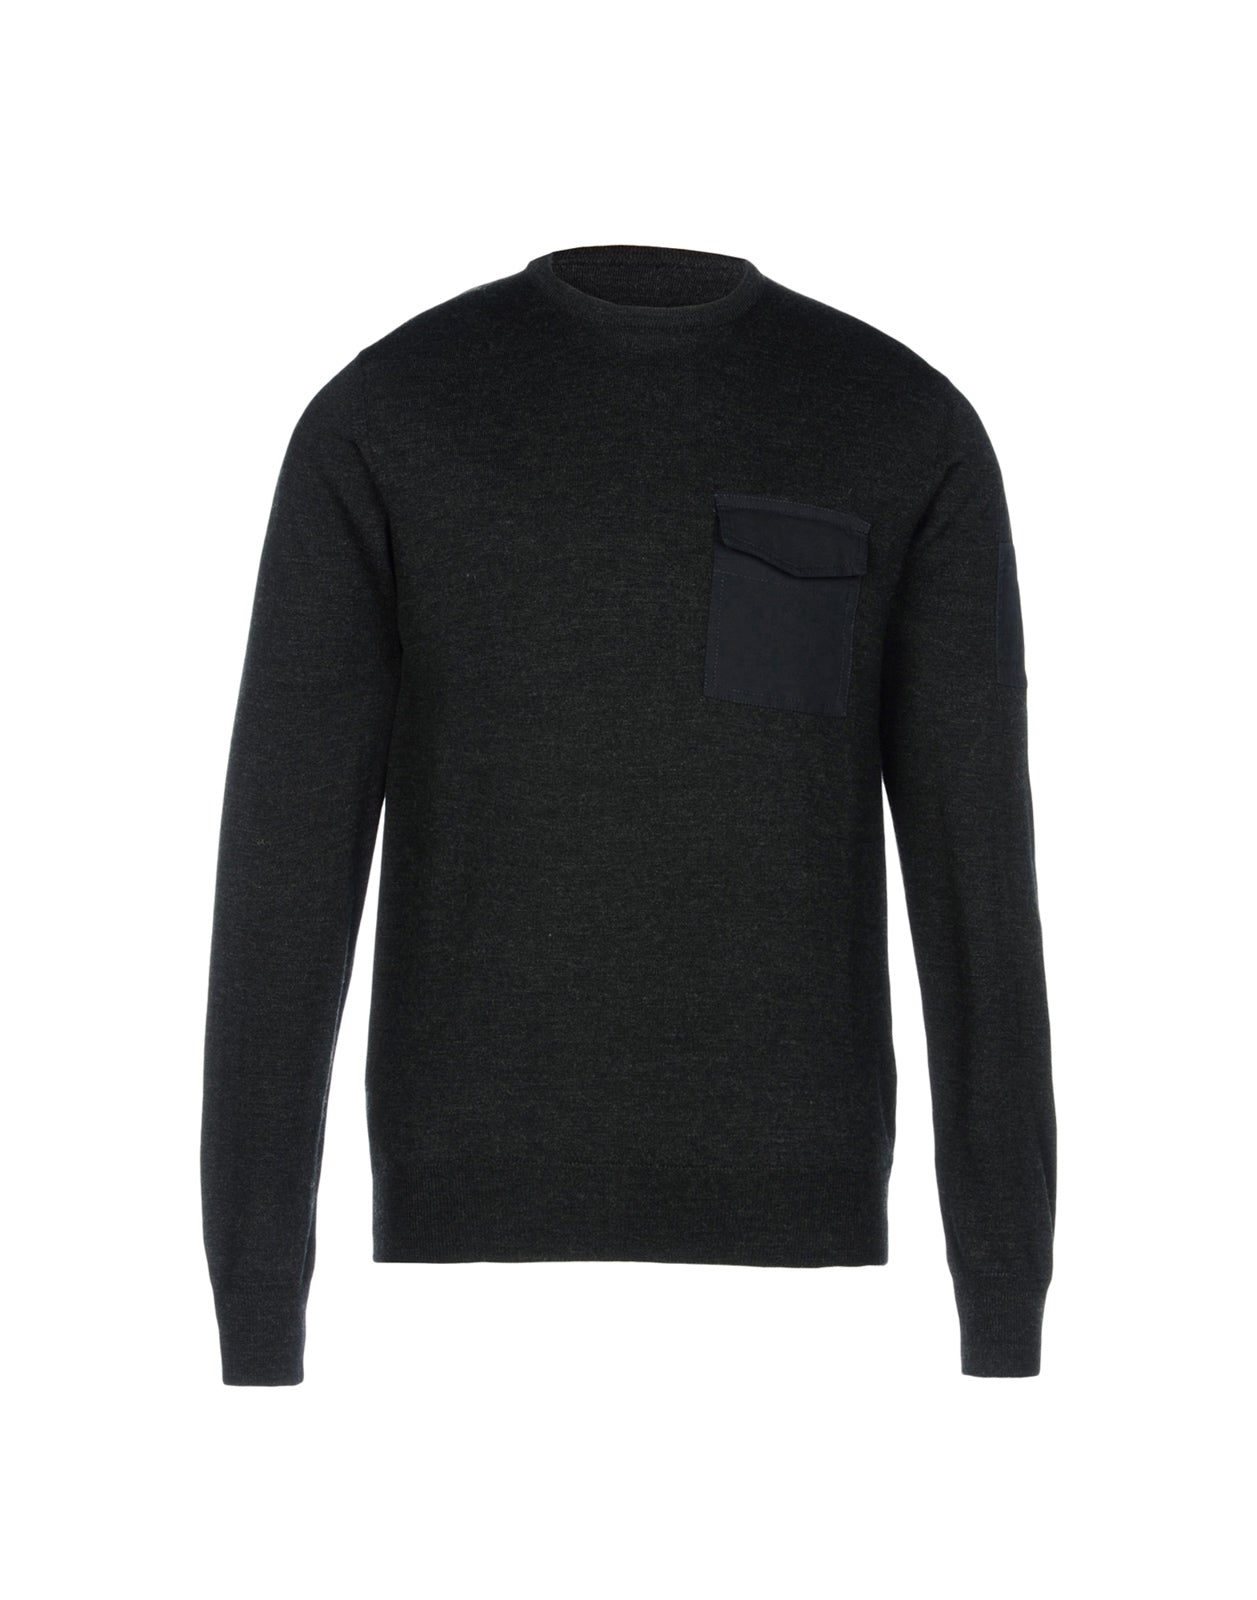 CAMOU By 8 Wool Jumper Size S Melange Utility Pockets Crew Neck Made in Italy gallery main photo